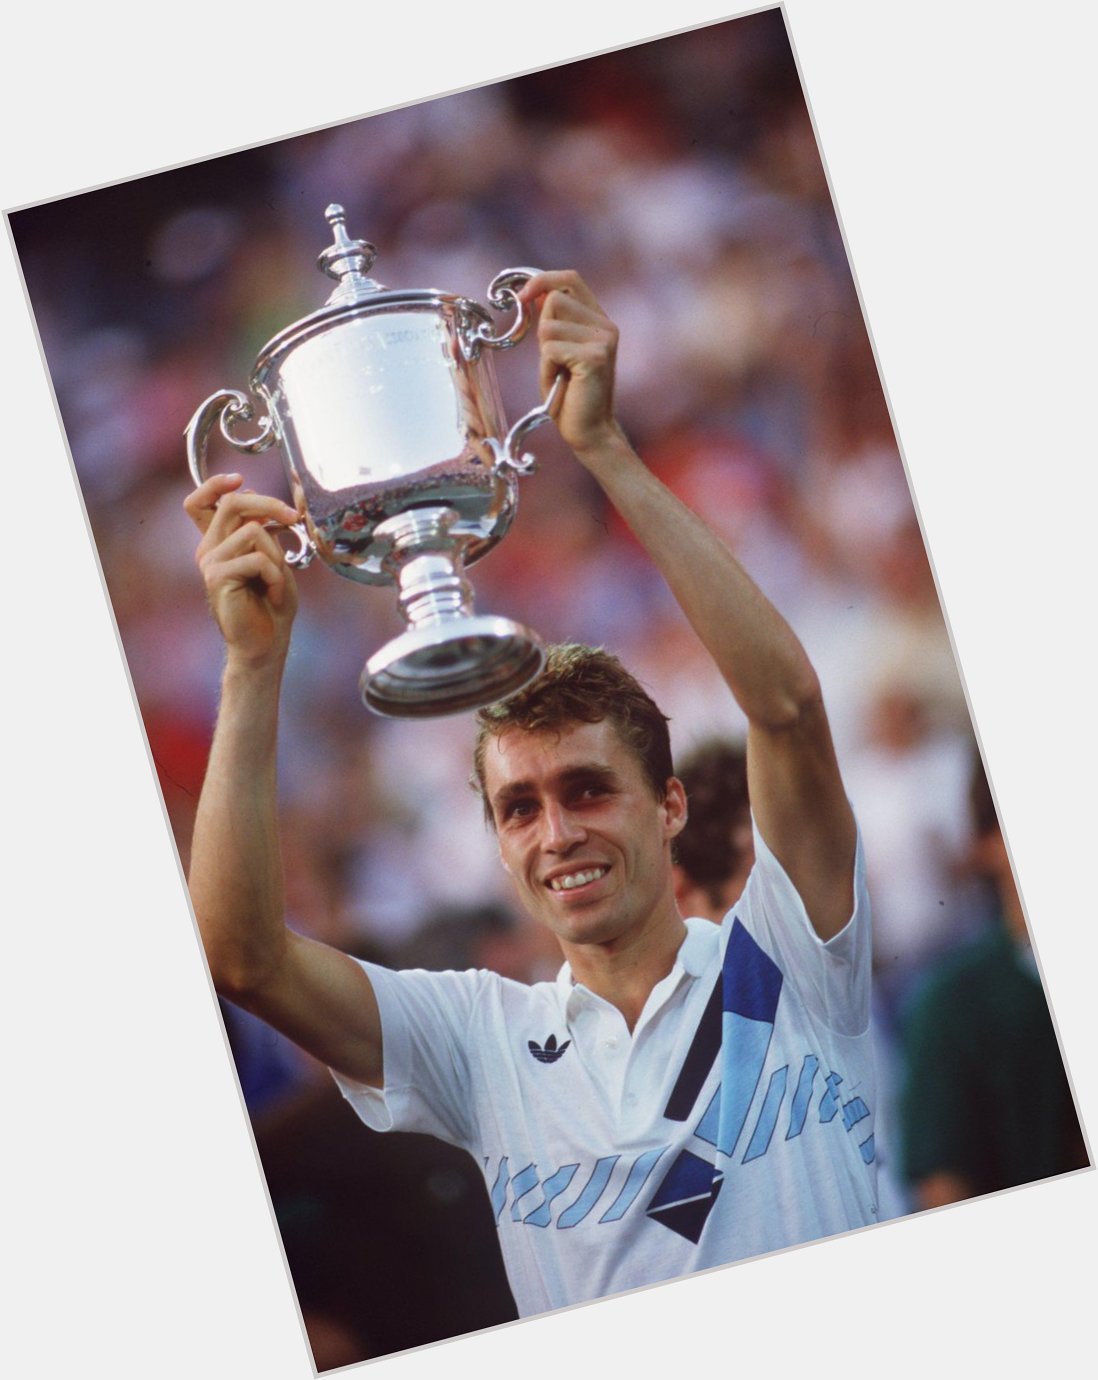 He won three titles and reached eight finals. Happy birthday to Hall of Famer Ivan Lendl! 